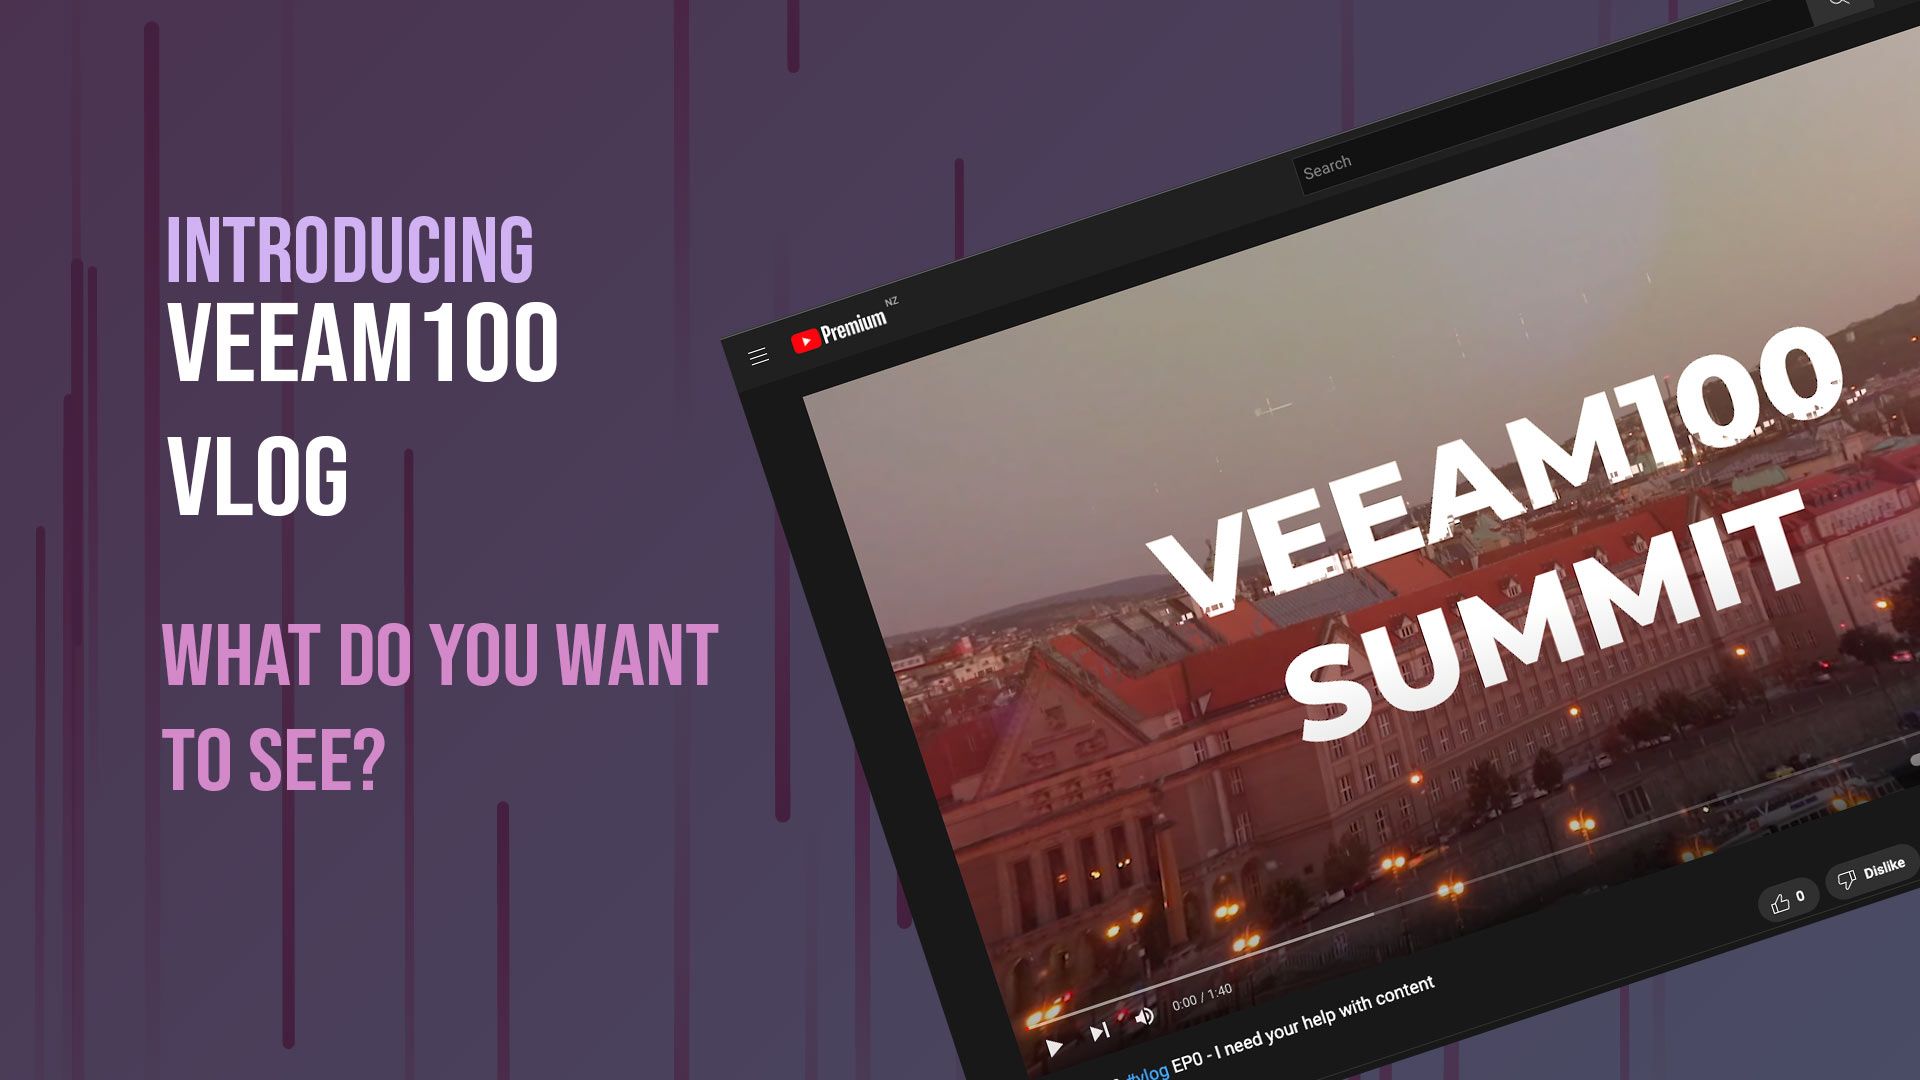 Introducing the Veeam100 VLOG - I need your help!